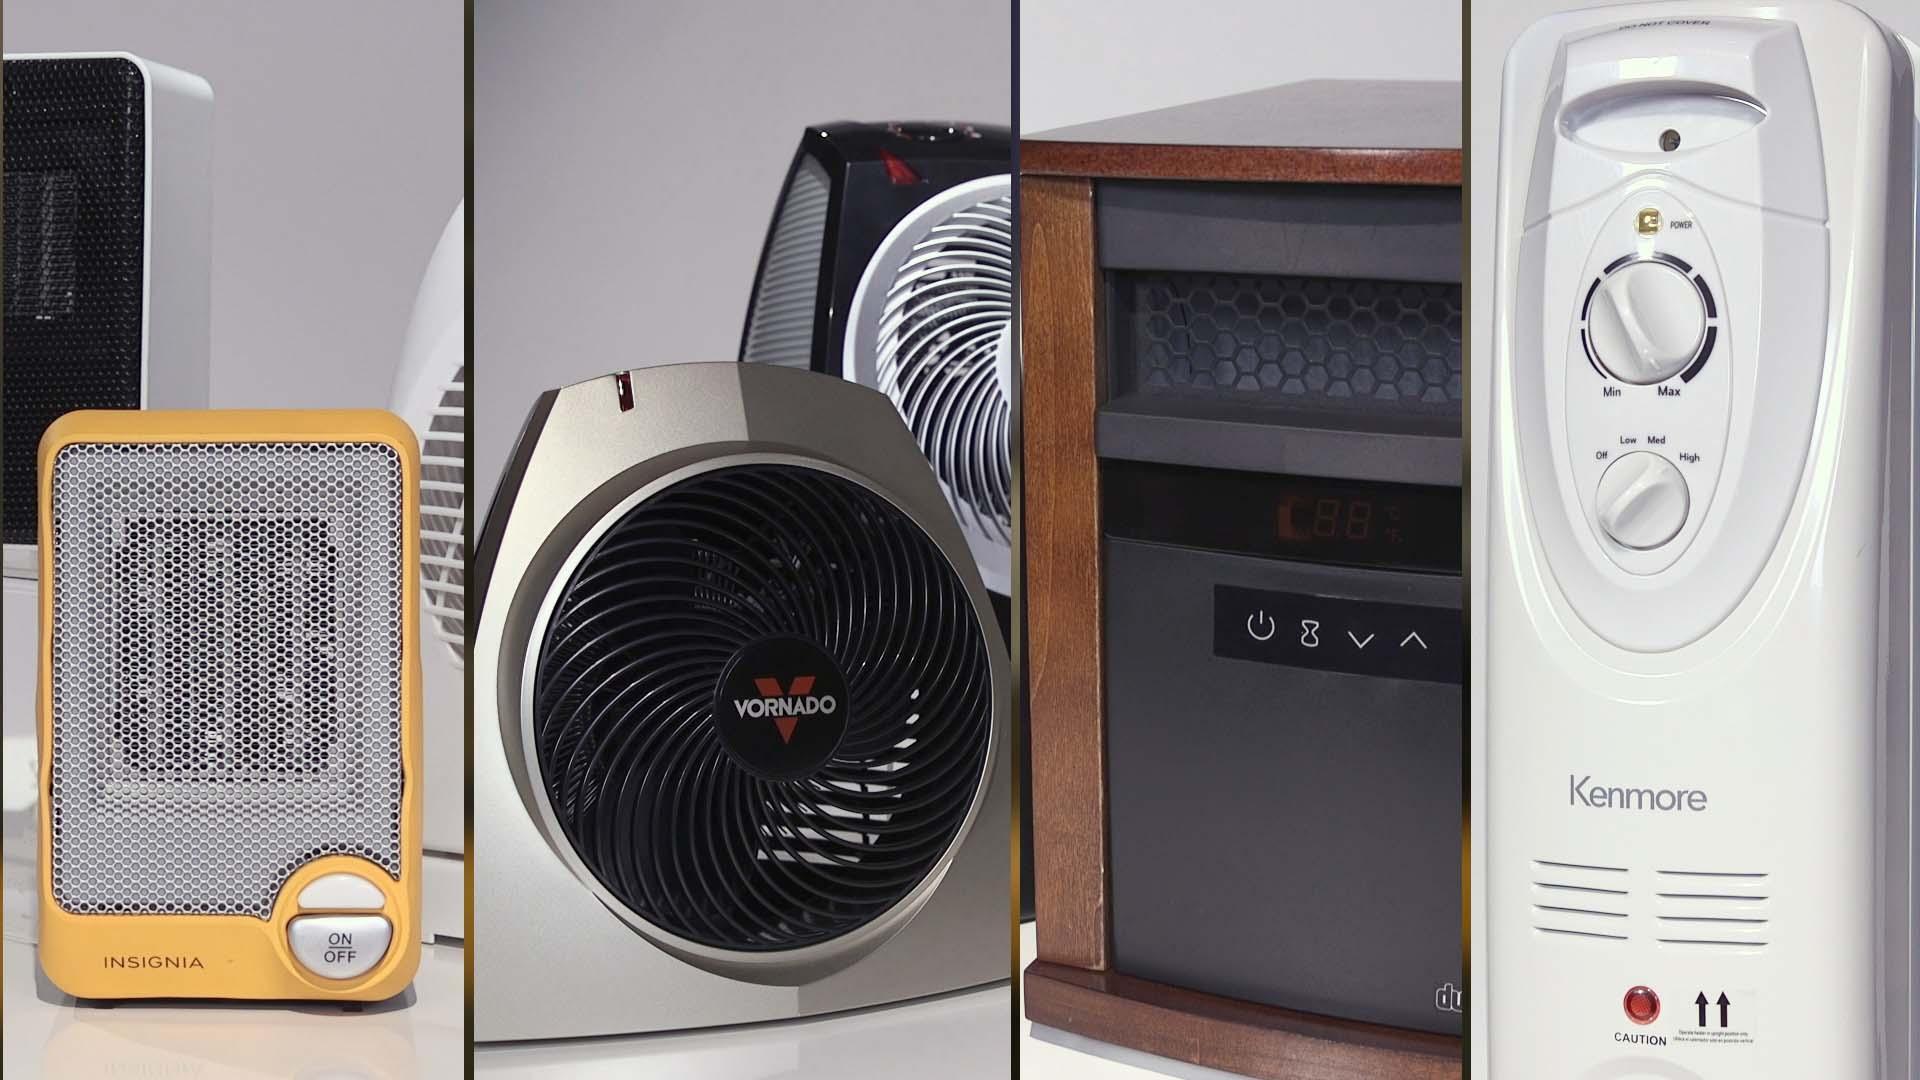 The 8 best space heaters to stay warm this winter, per experts